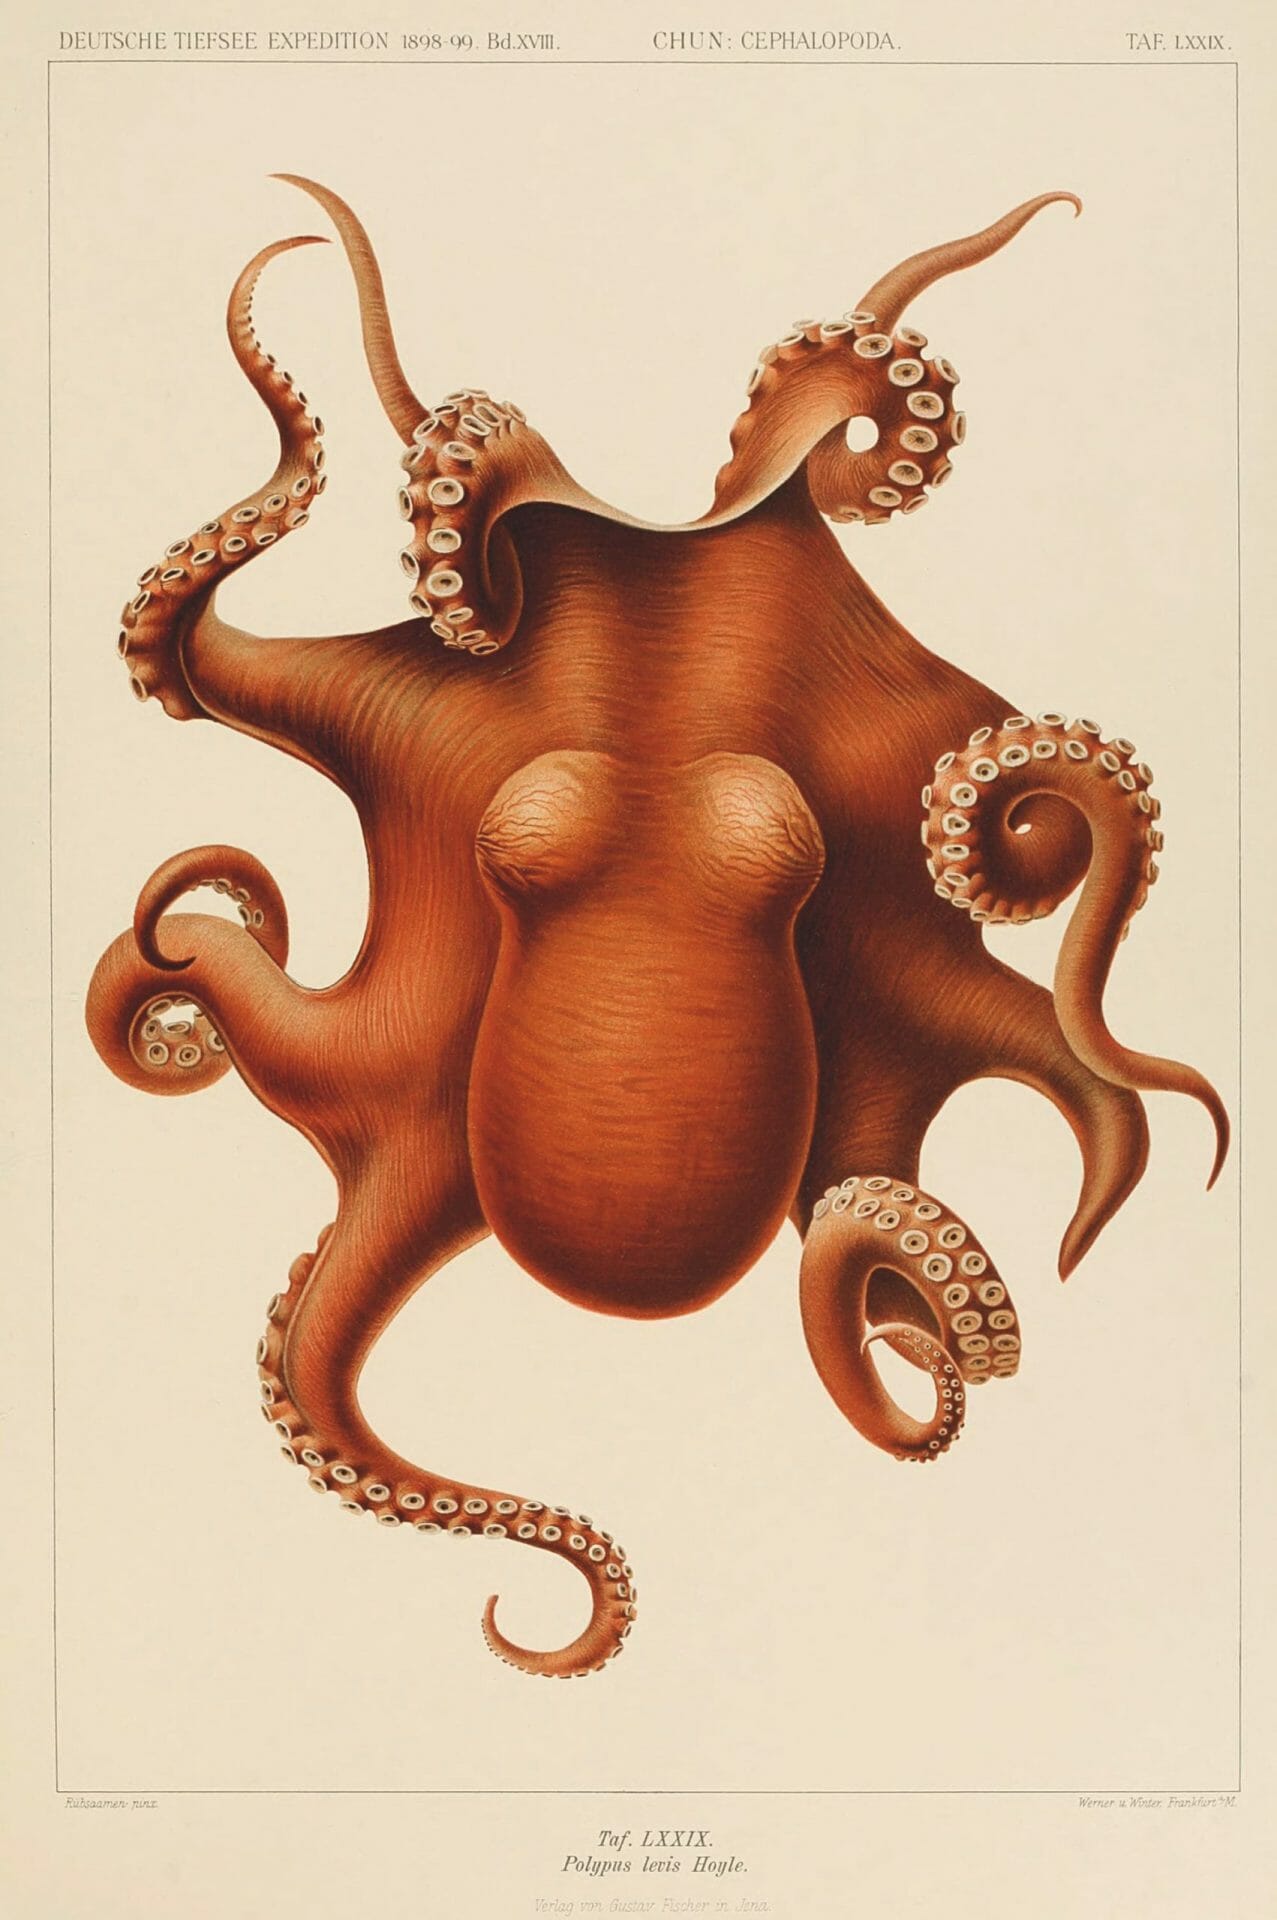 Carl Chun, Polypus levis, from Die Cephalopoden (1910–15), color lithograph, 35 × 25 centimeters. Image from the Biodiversity Heritage Library/Contributed by MBLWHOI Library, Marine Biological Laboratory, Woods Hole Oceanographic Institution Library, Massachusetts.